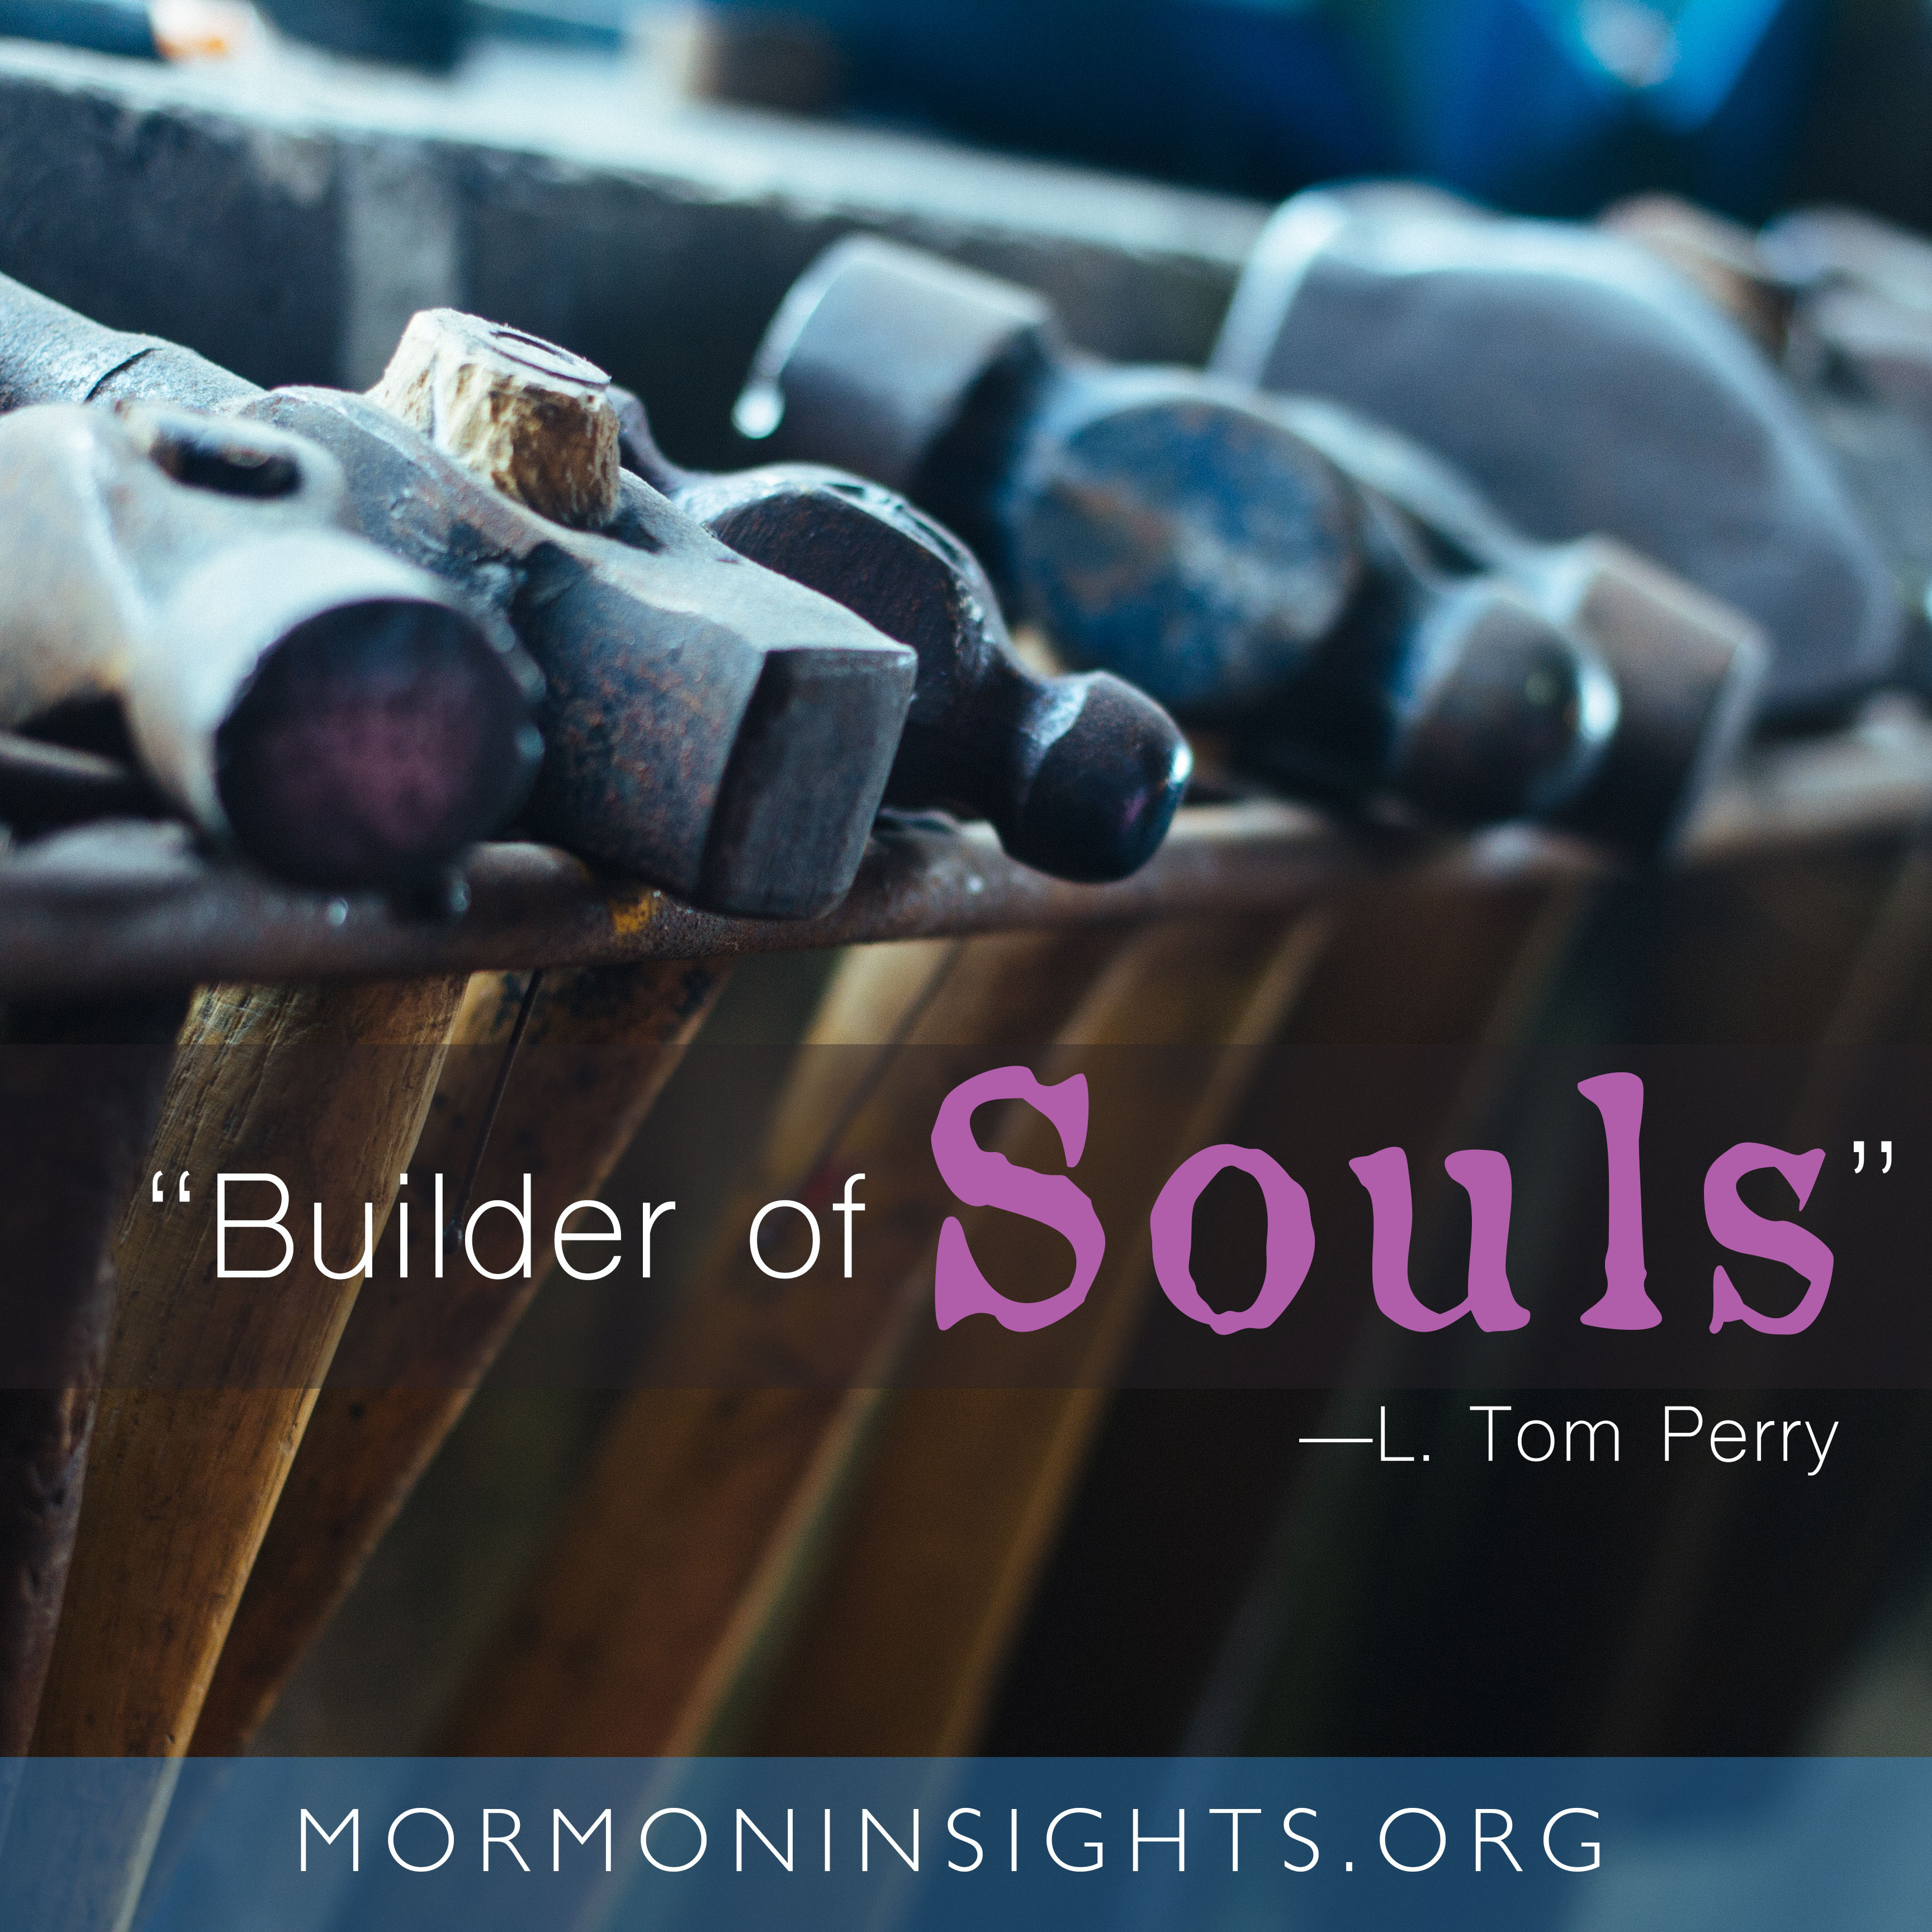 hammers in a row; quote: "Builder of souls" - L. Tom Perry